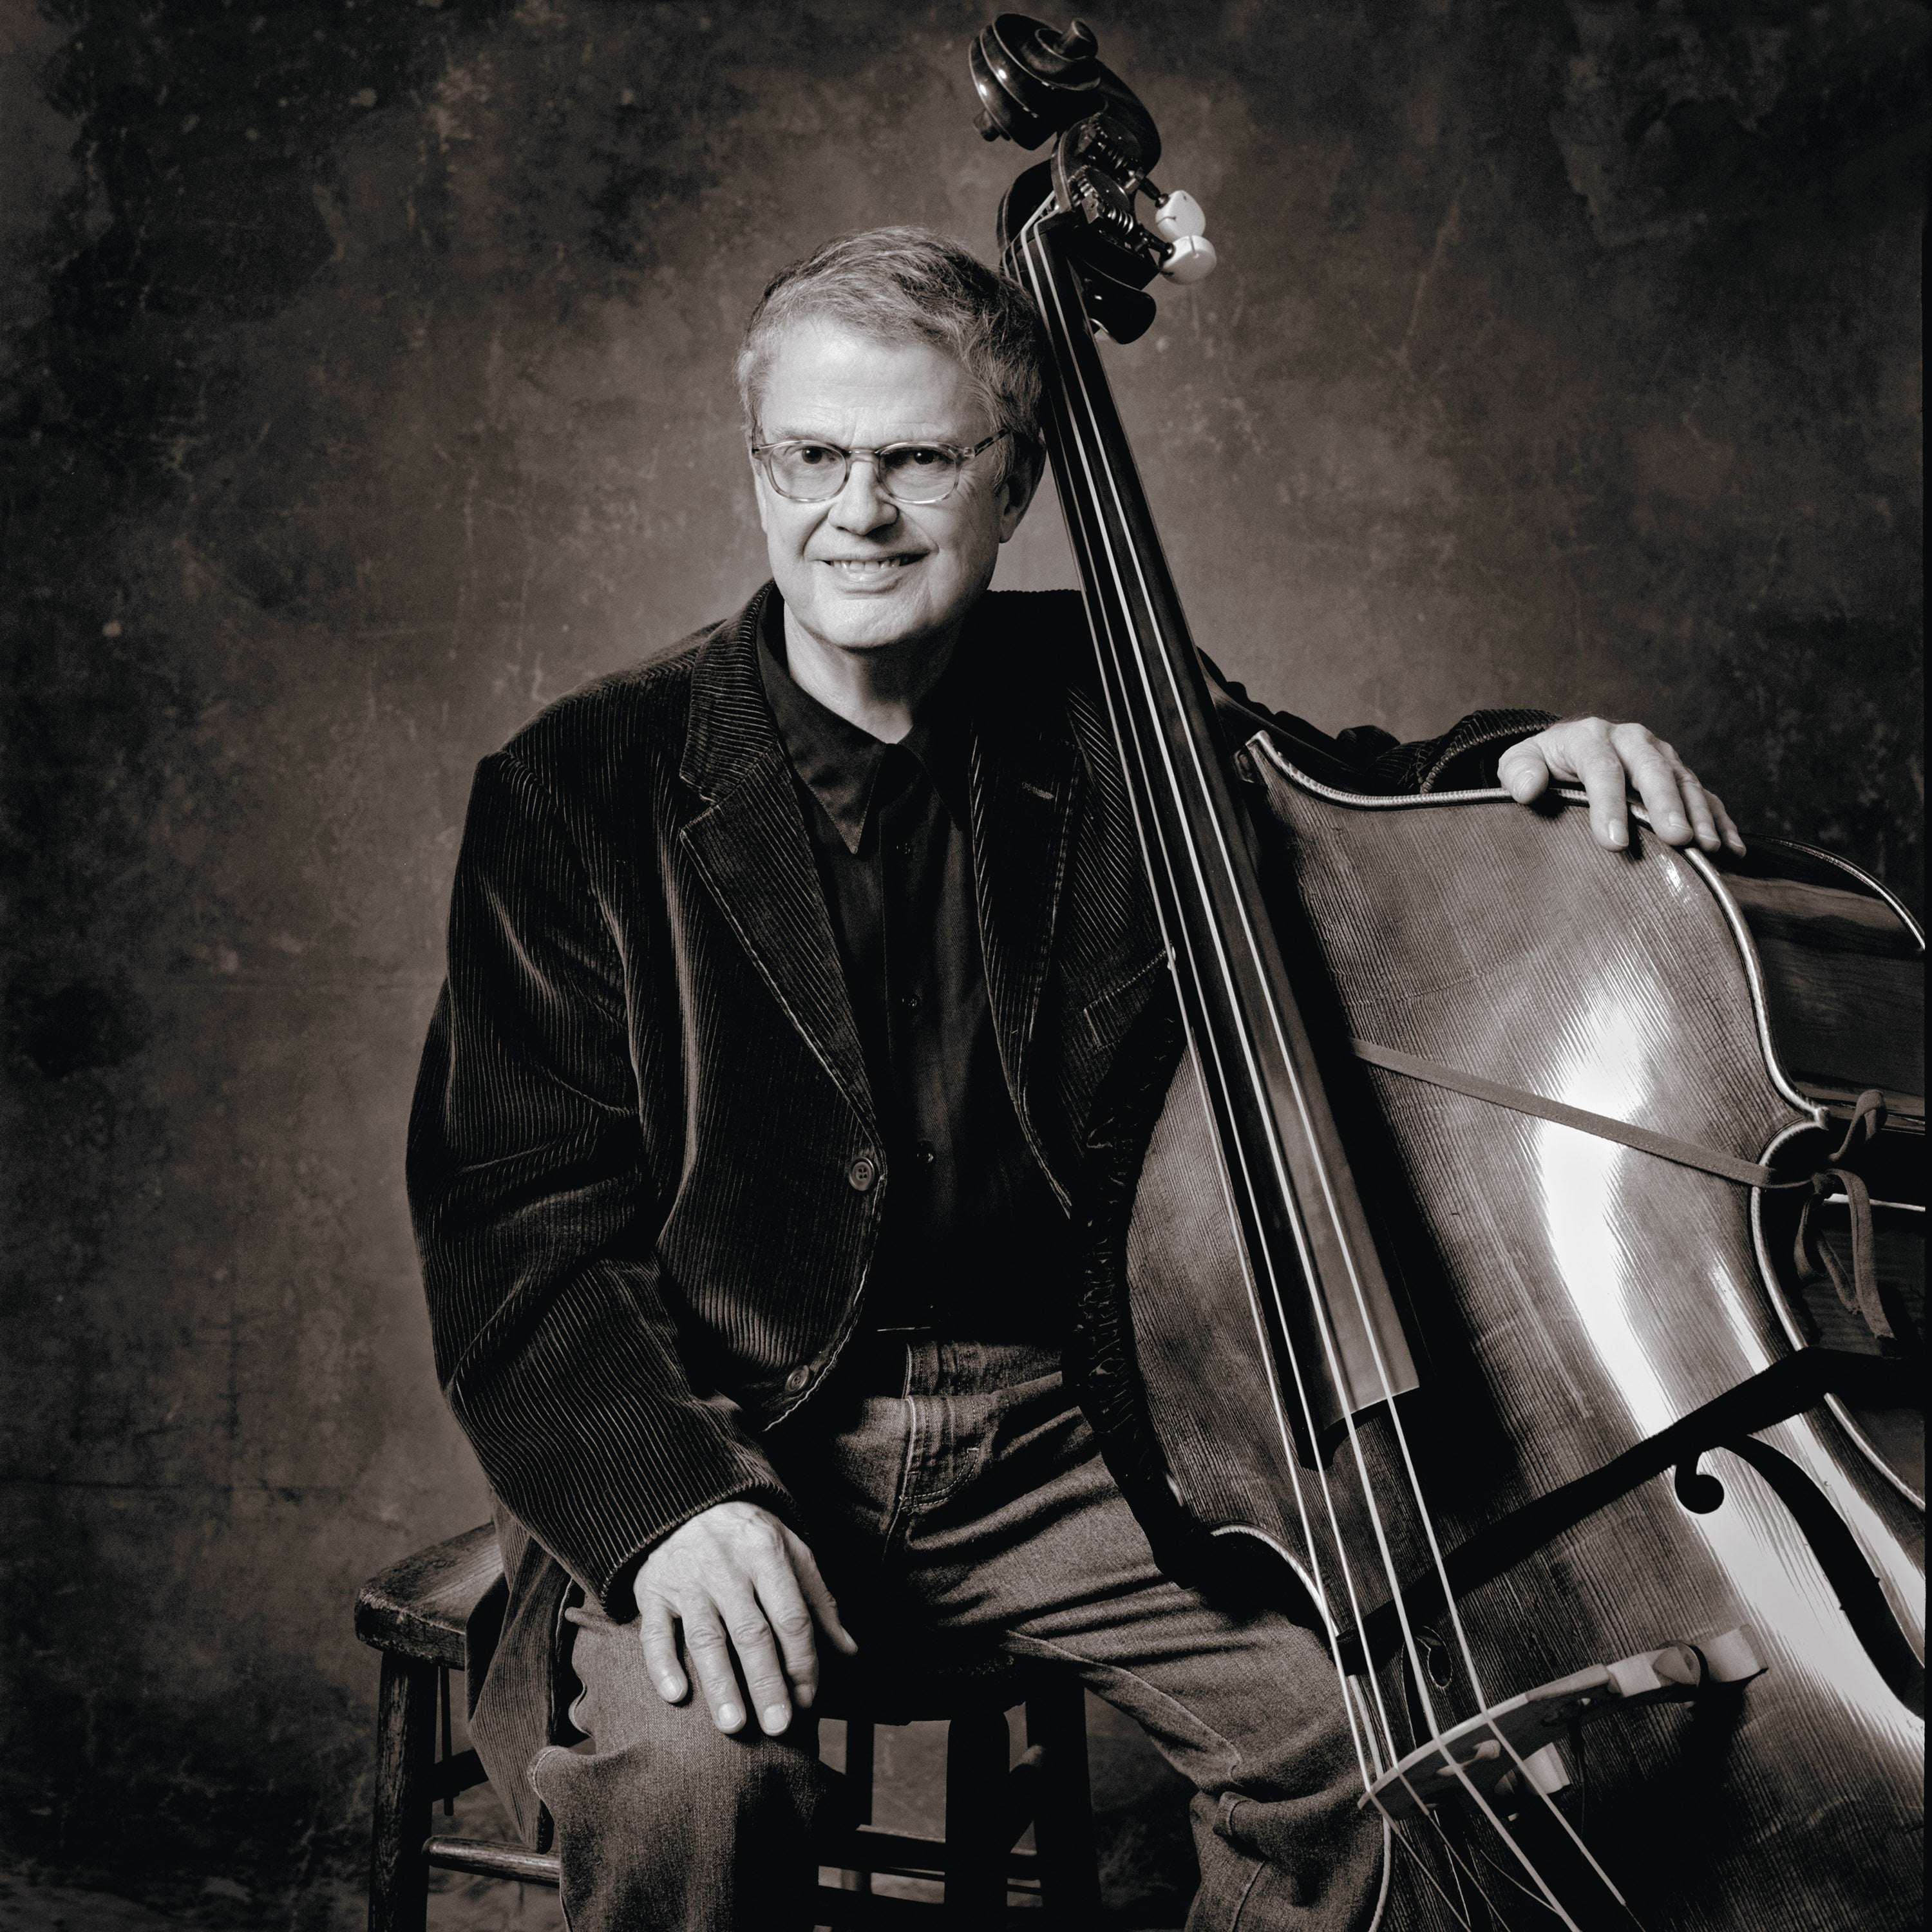 This undated file photo provided by Universal Music Group shows bassist Charlie Haden. Haden died Friday, July 11, 2014 in Los Angeles after a long illness. He was 76.